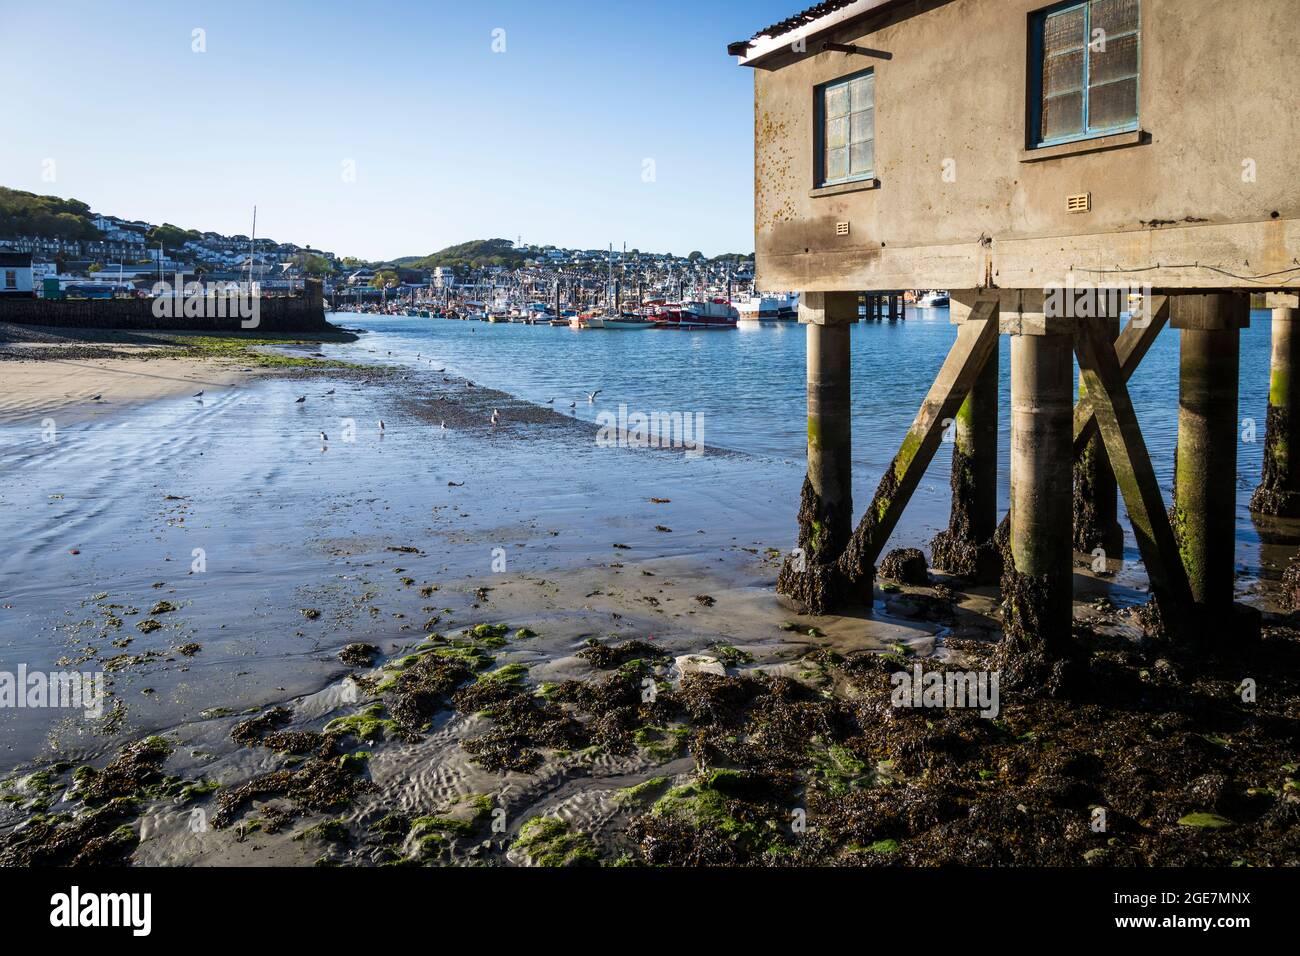 Pillars of the dry dock with Newlyn Harbour in the background, Cornwall, England. Stock Photo